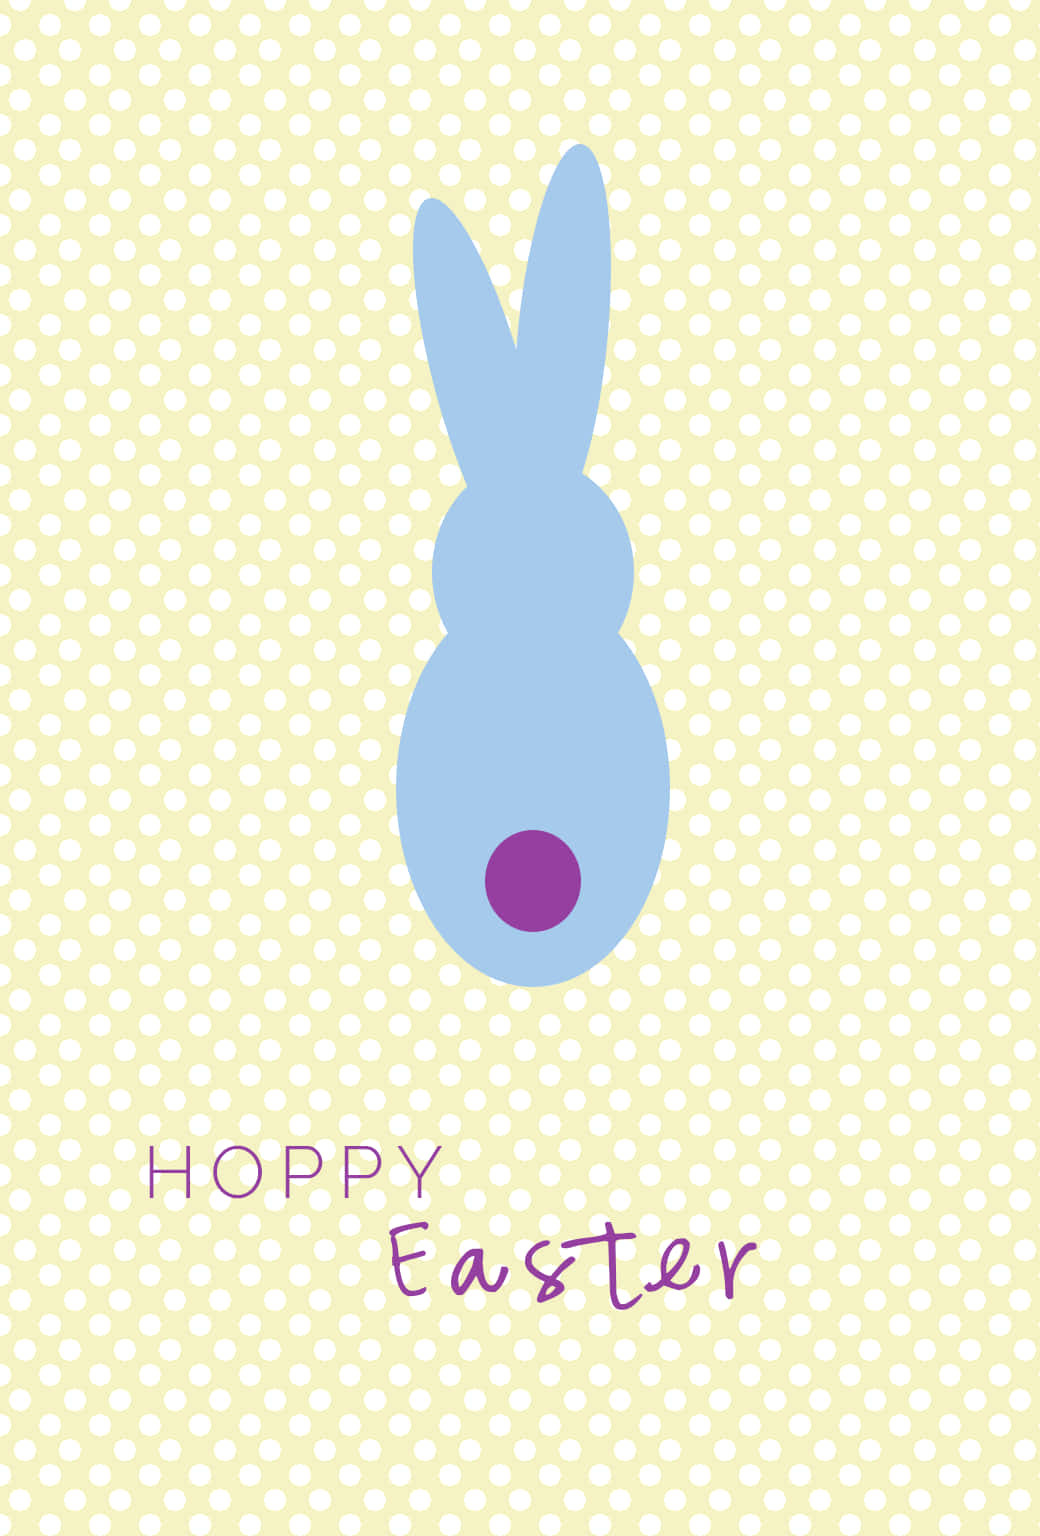 Get Creative this Easter with a Cute Easter Iphone Wallpaper Wallpaper